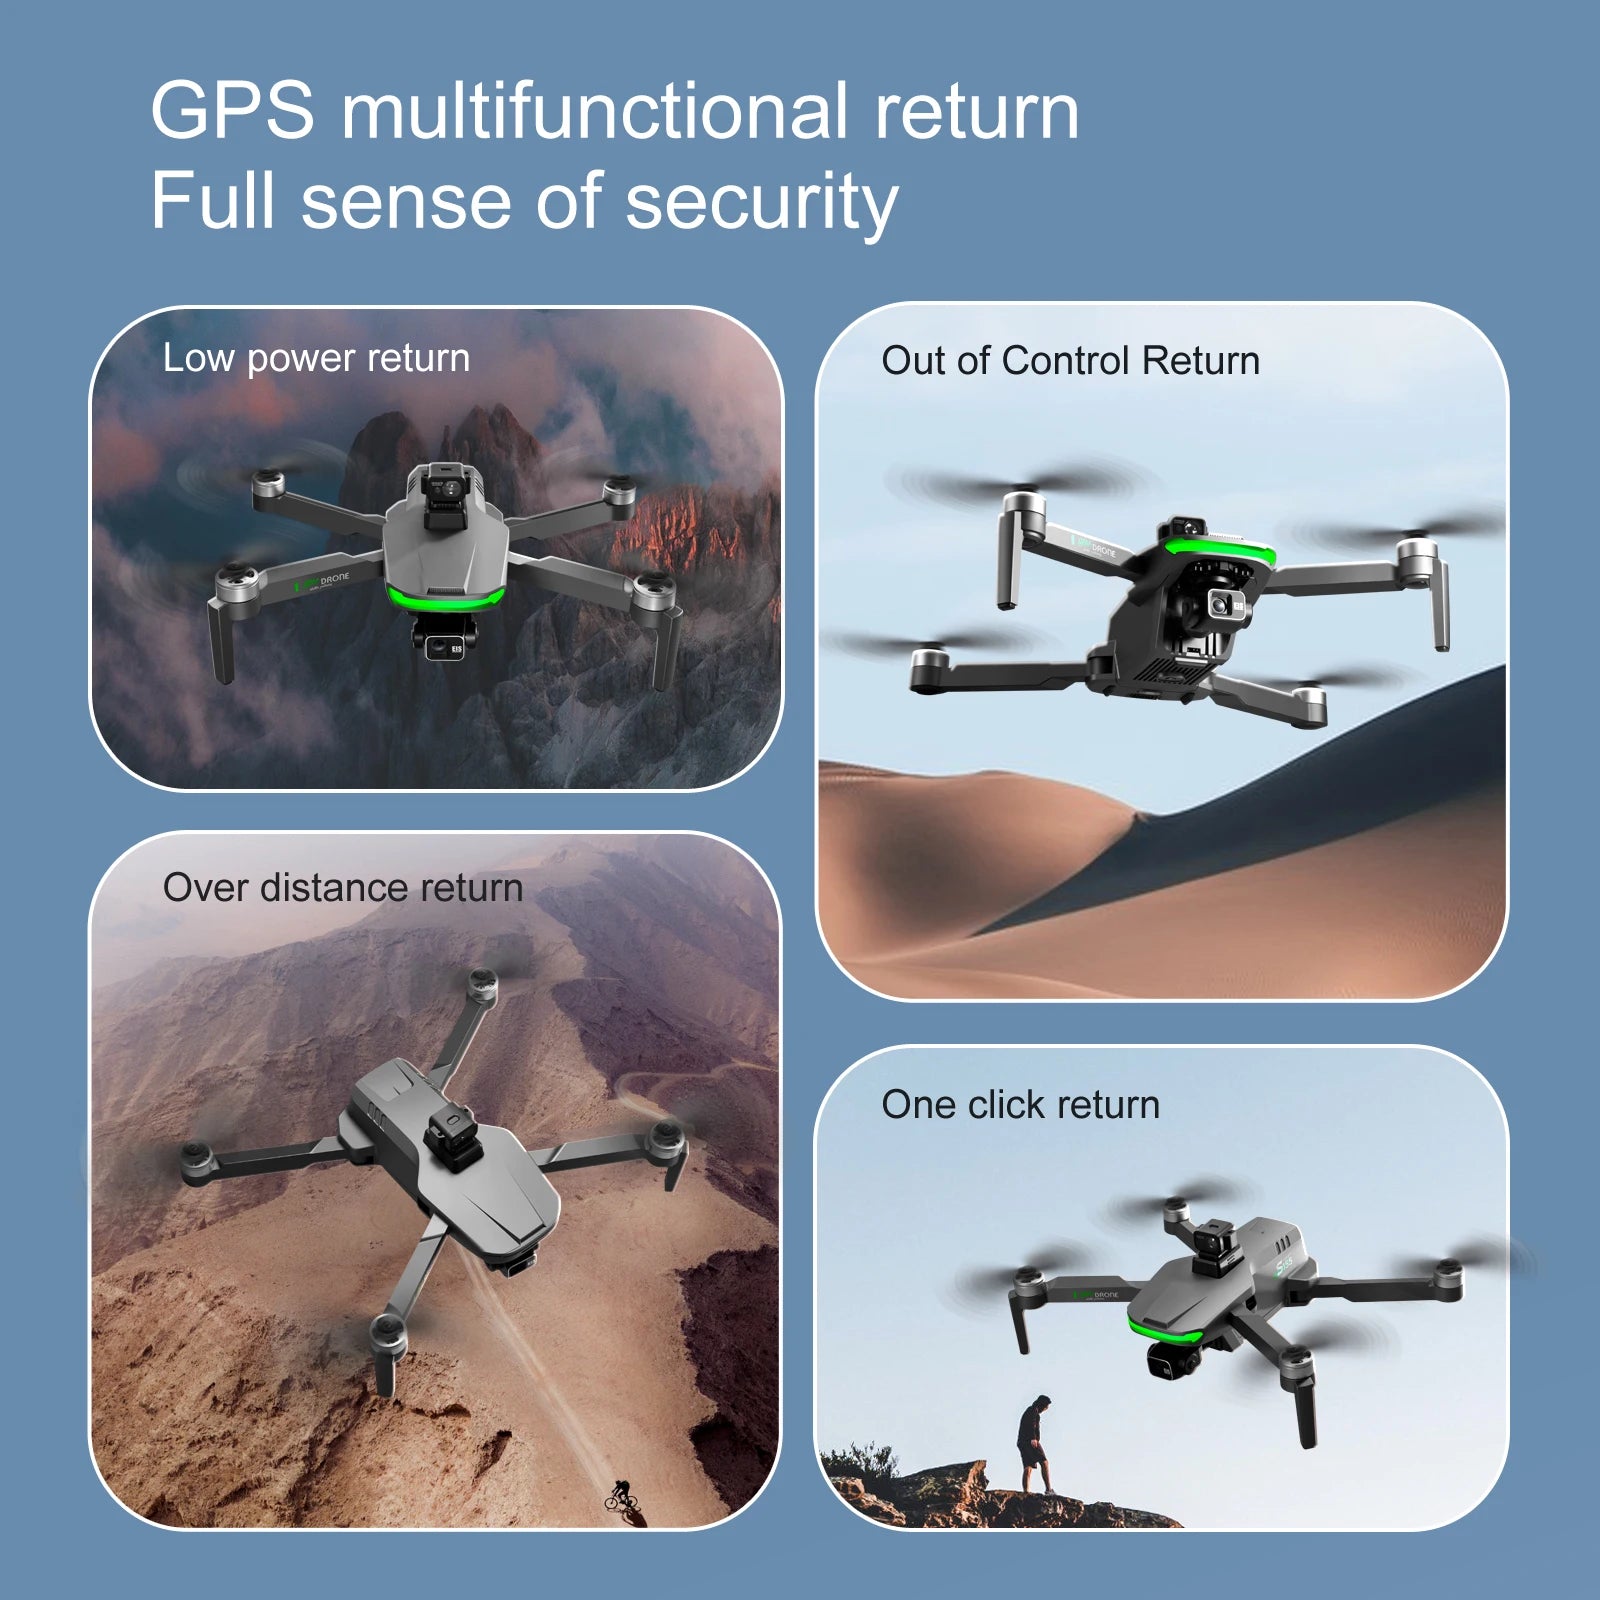 S155 Pro GPS Drone, GPS multifunctional return Full sense of security Low power return Out of Control Return Over distance return One